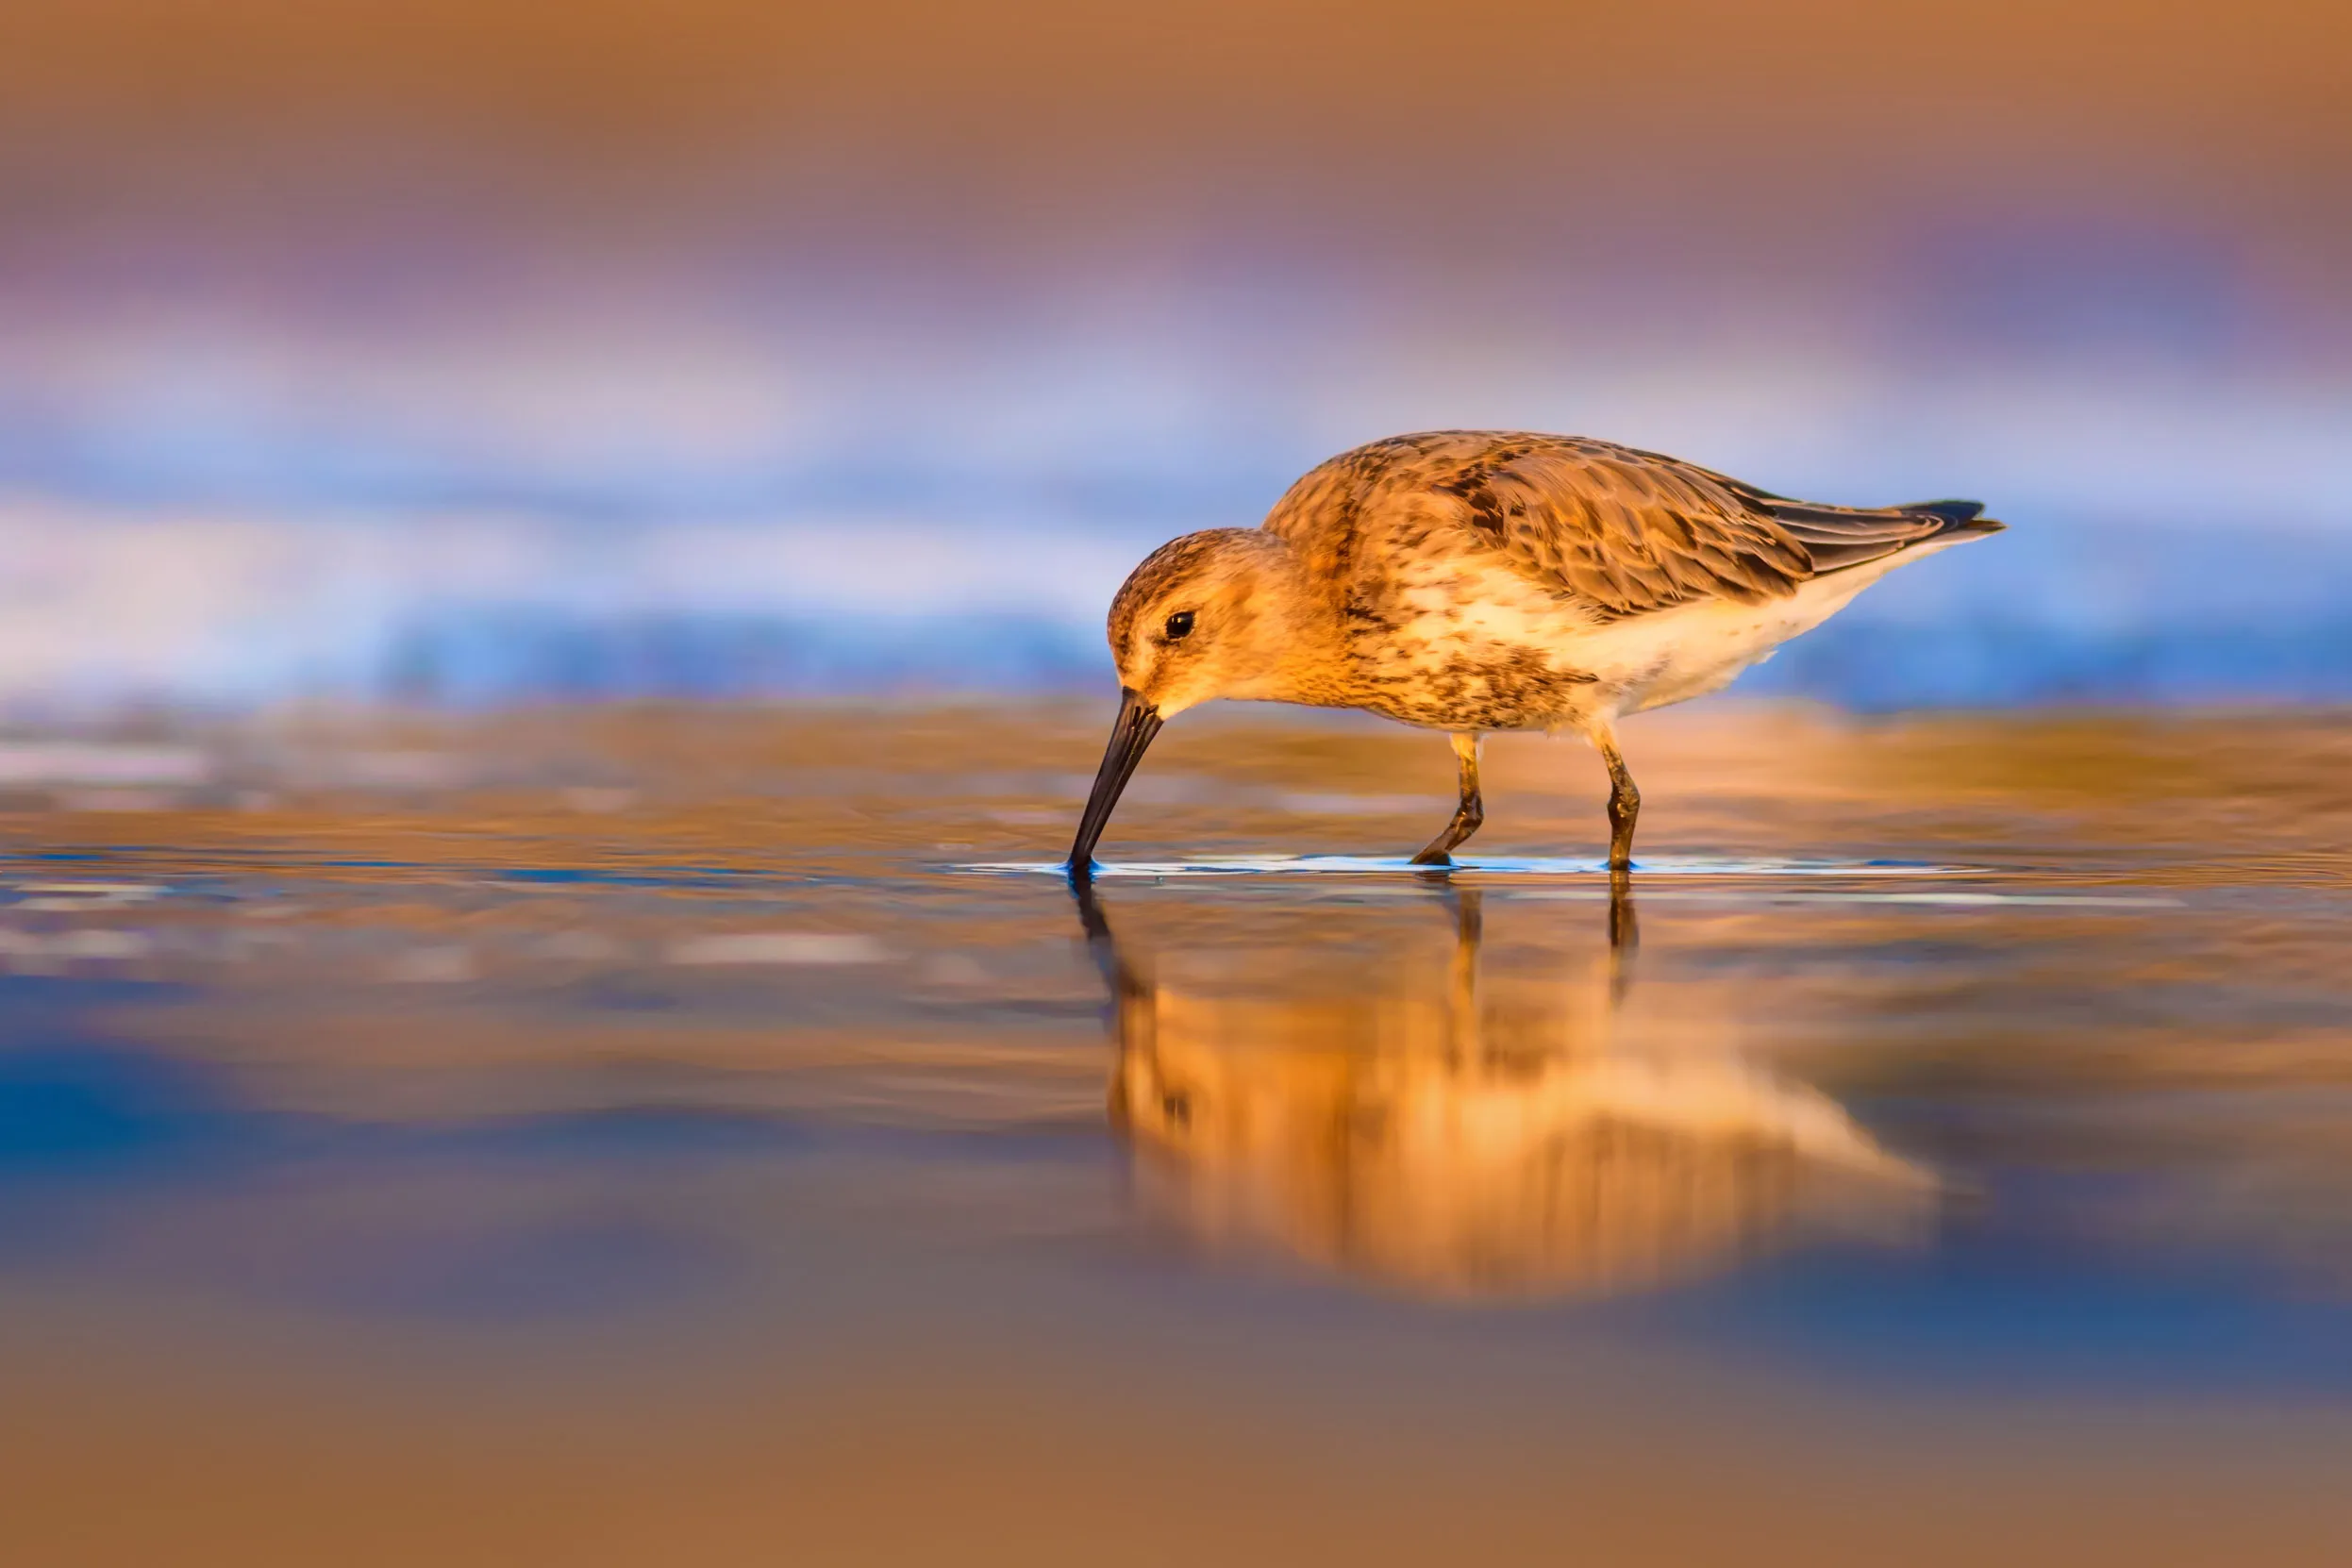 A lone Curlew Sandpiper drinking from shallow water.